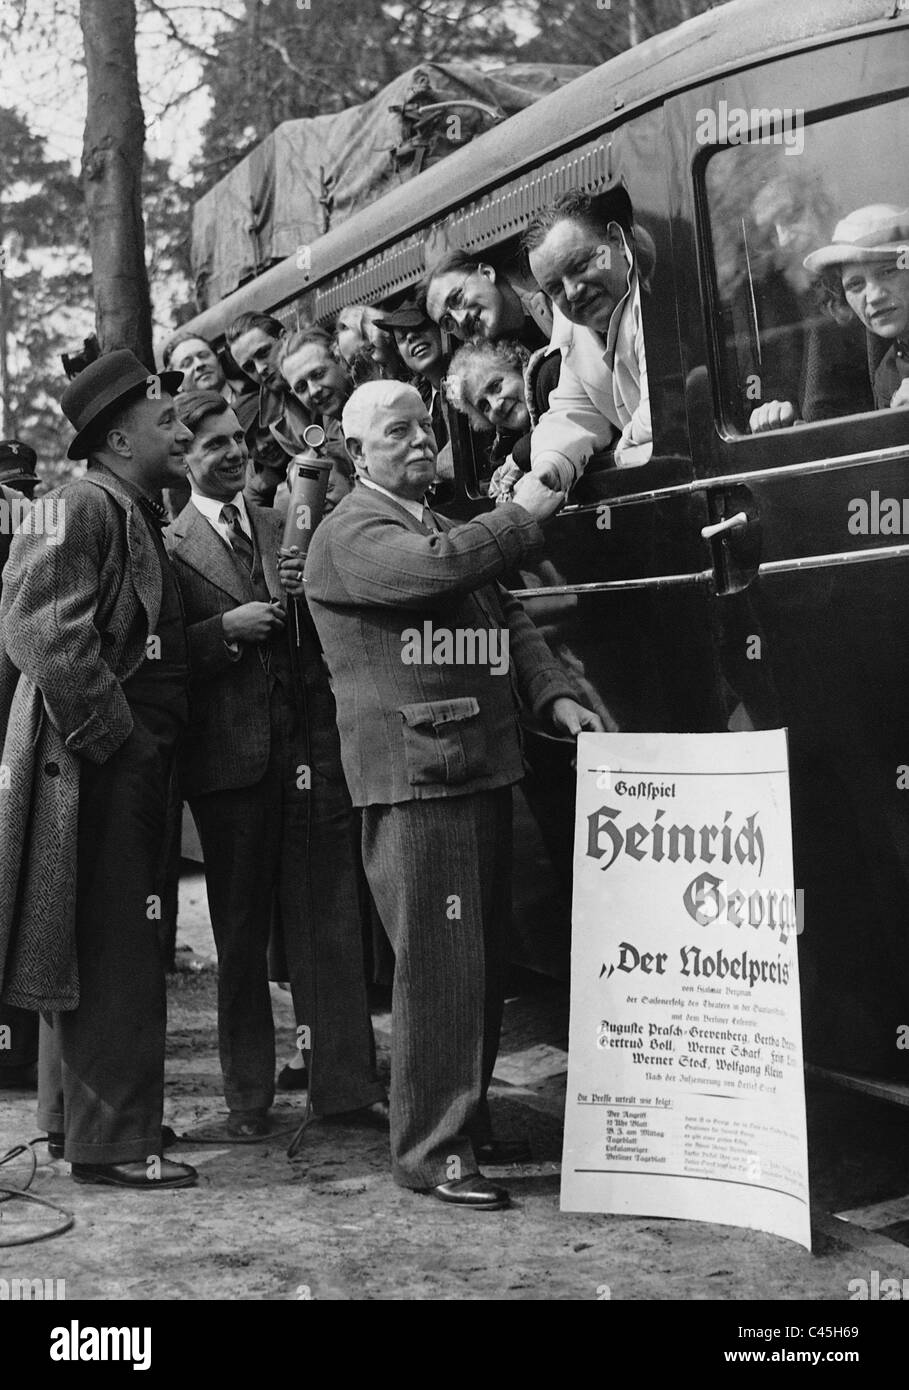 Heinrich George and his colleagues on a tour, 1936 Stock Photo